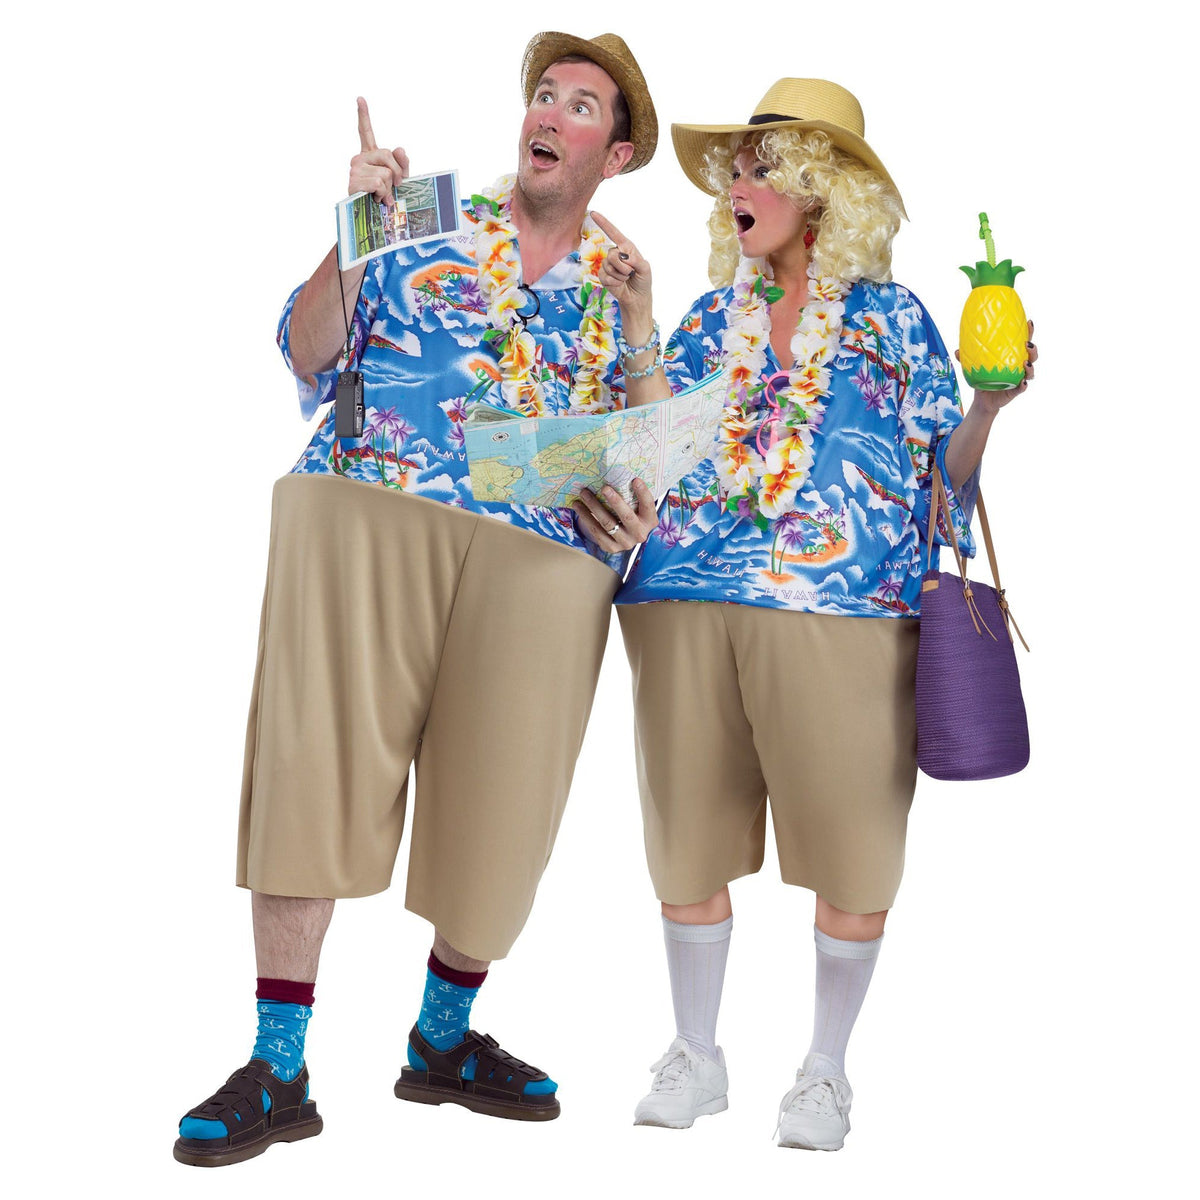 FUN WORLD Theme Party Tacky Tourist Costume for Adults 023168099464